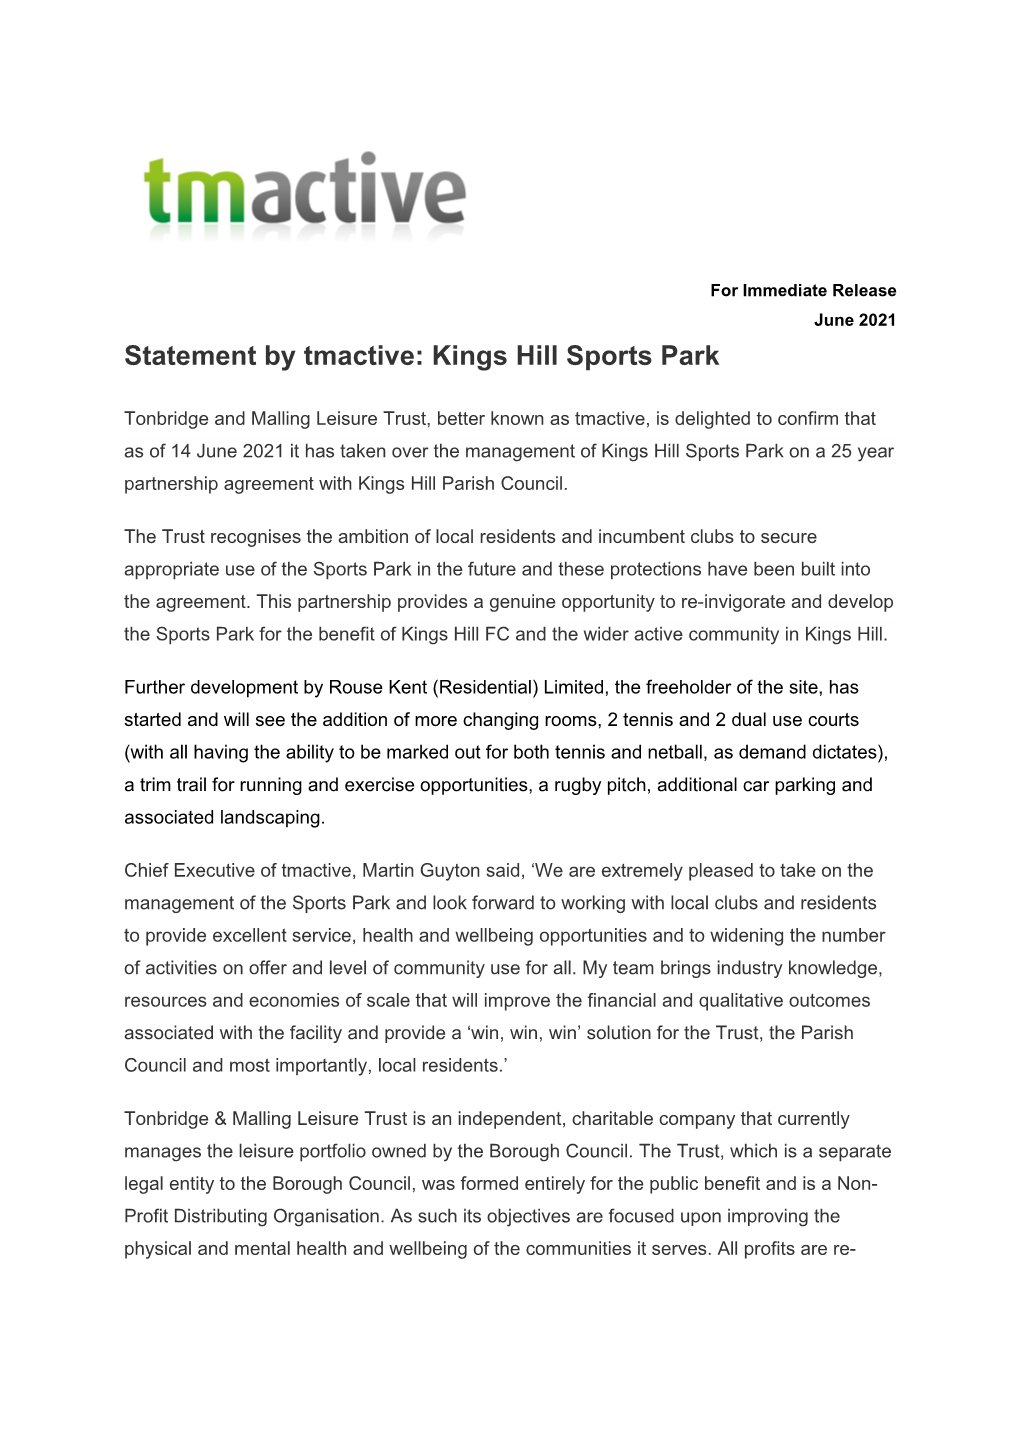 Statement by Tmactive: Kings Hill Sports Park